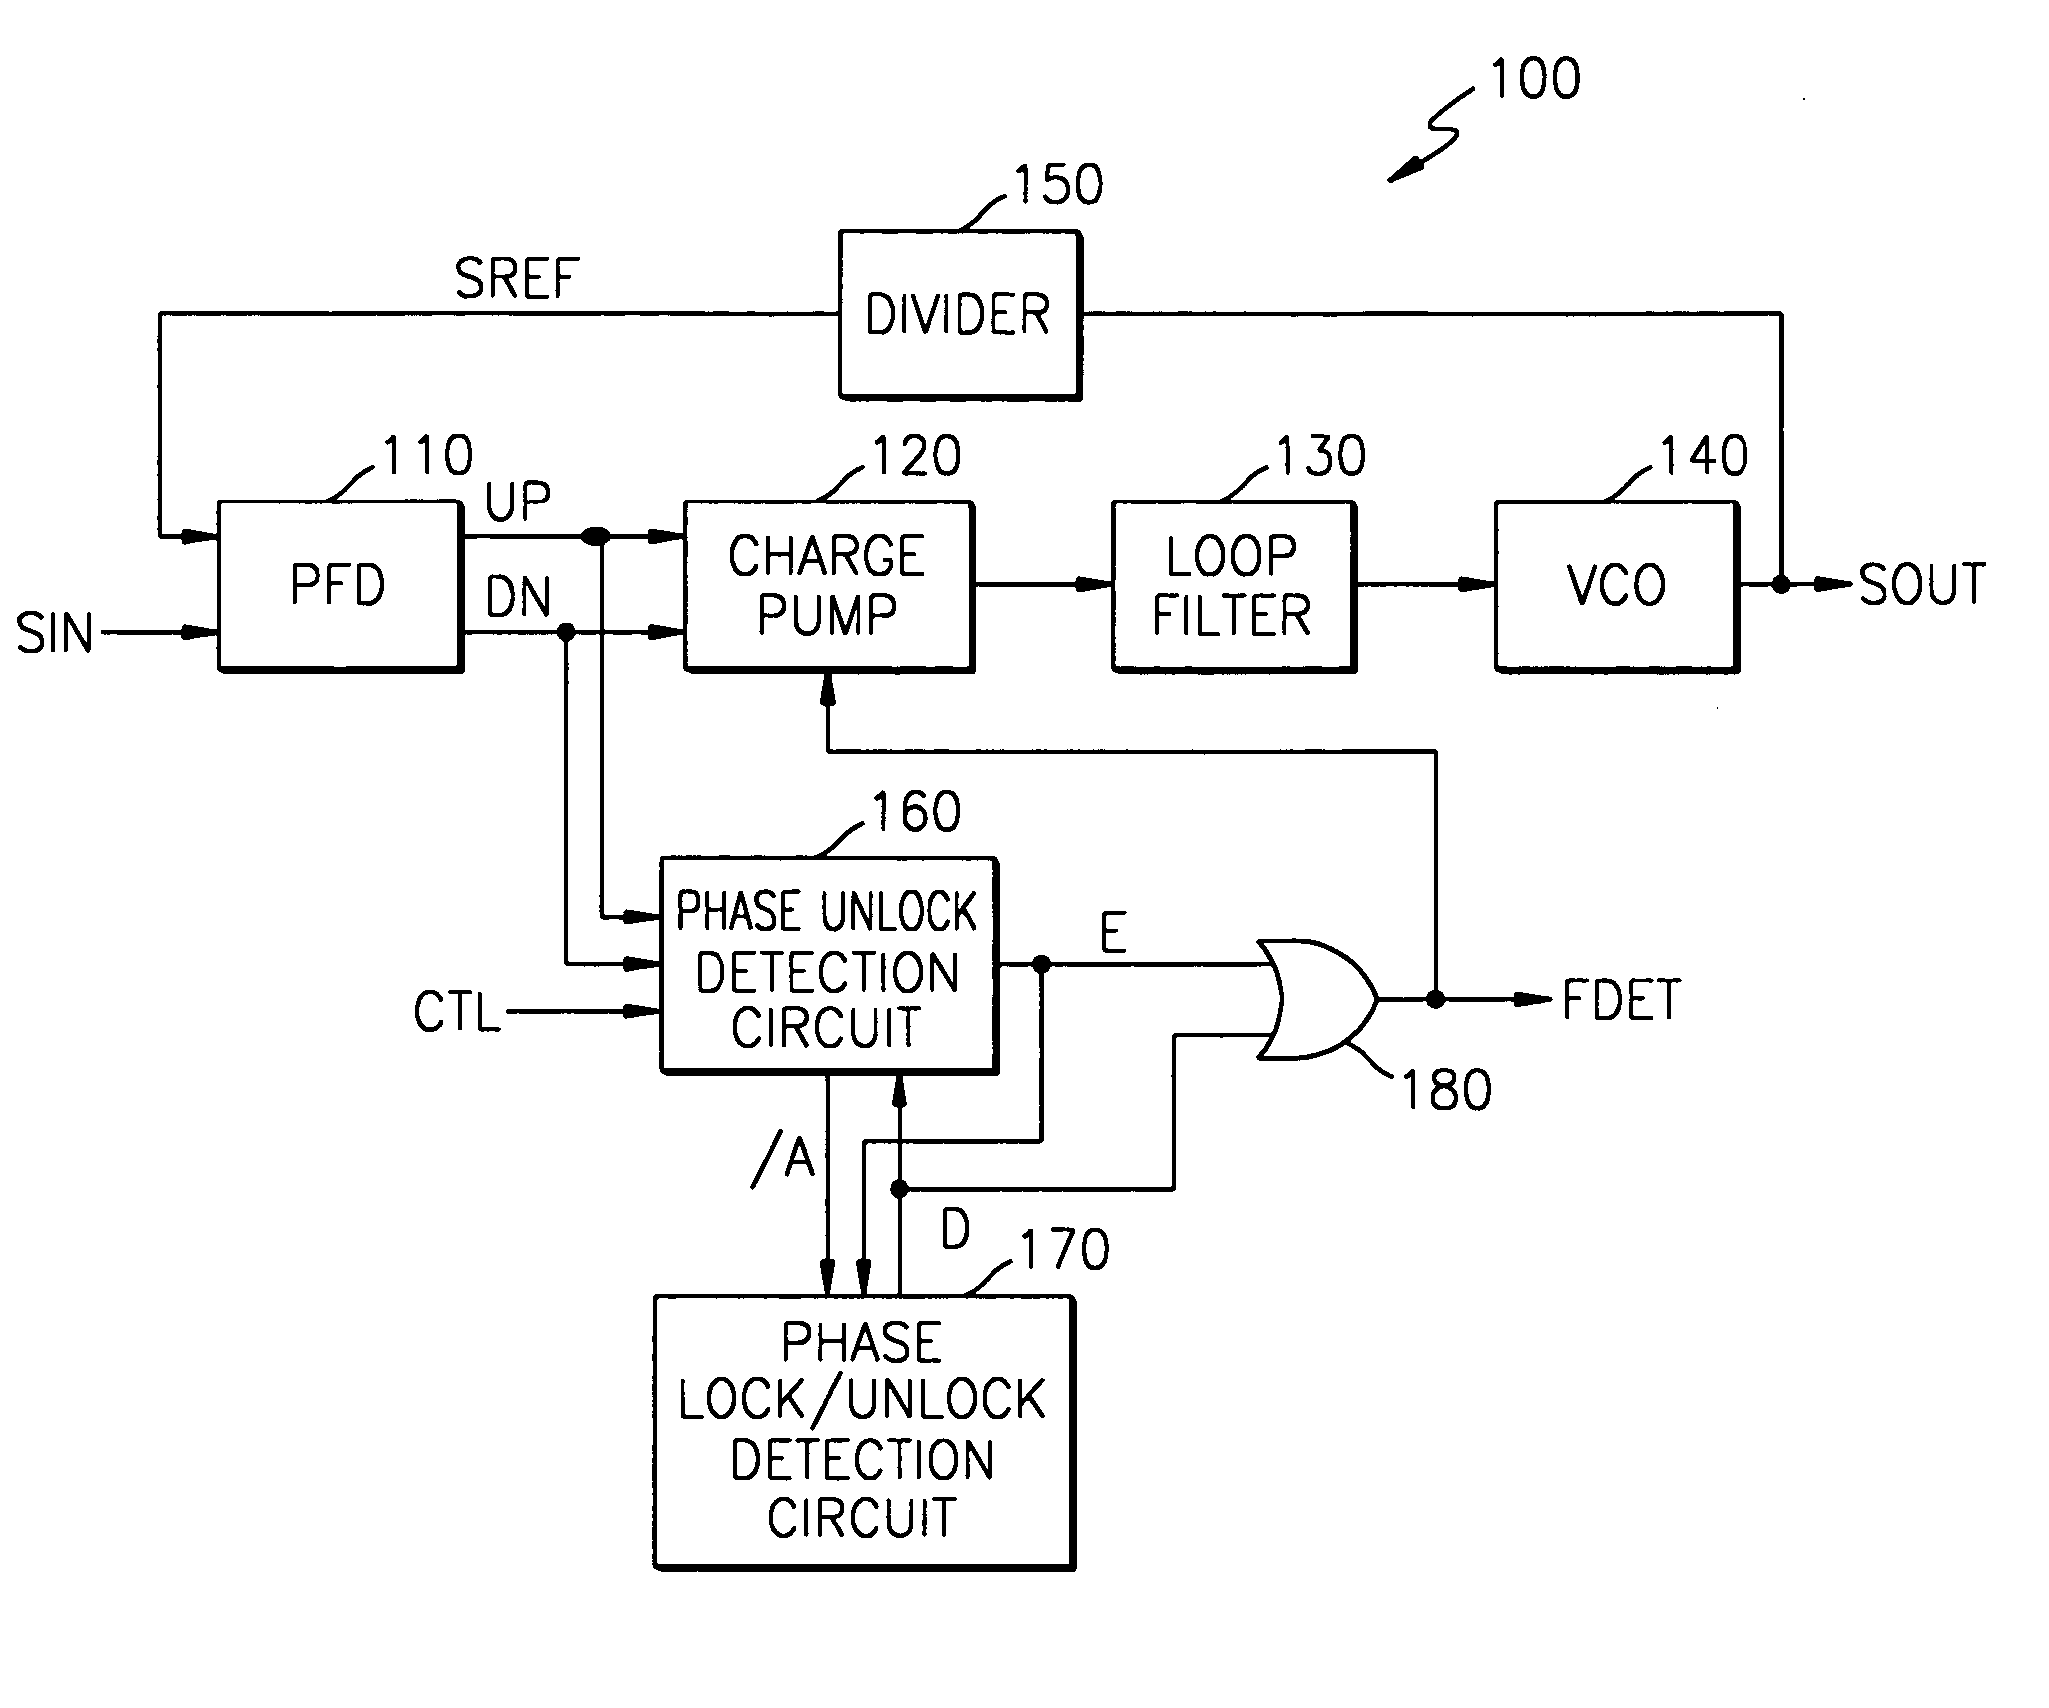 Phase locked loop with improved phase lock/unlock detection function